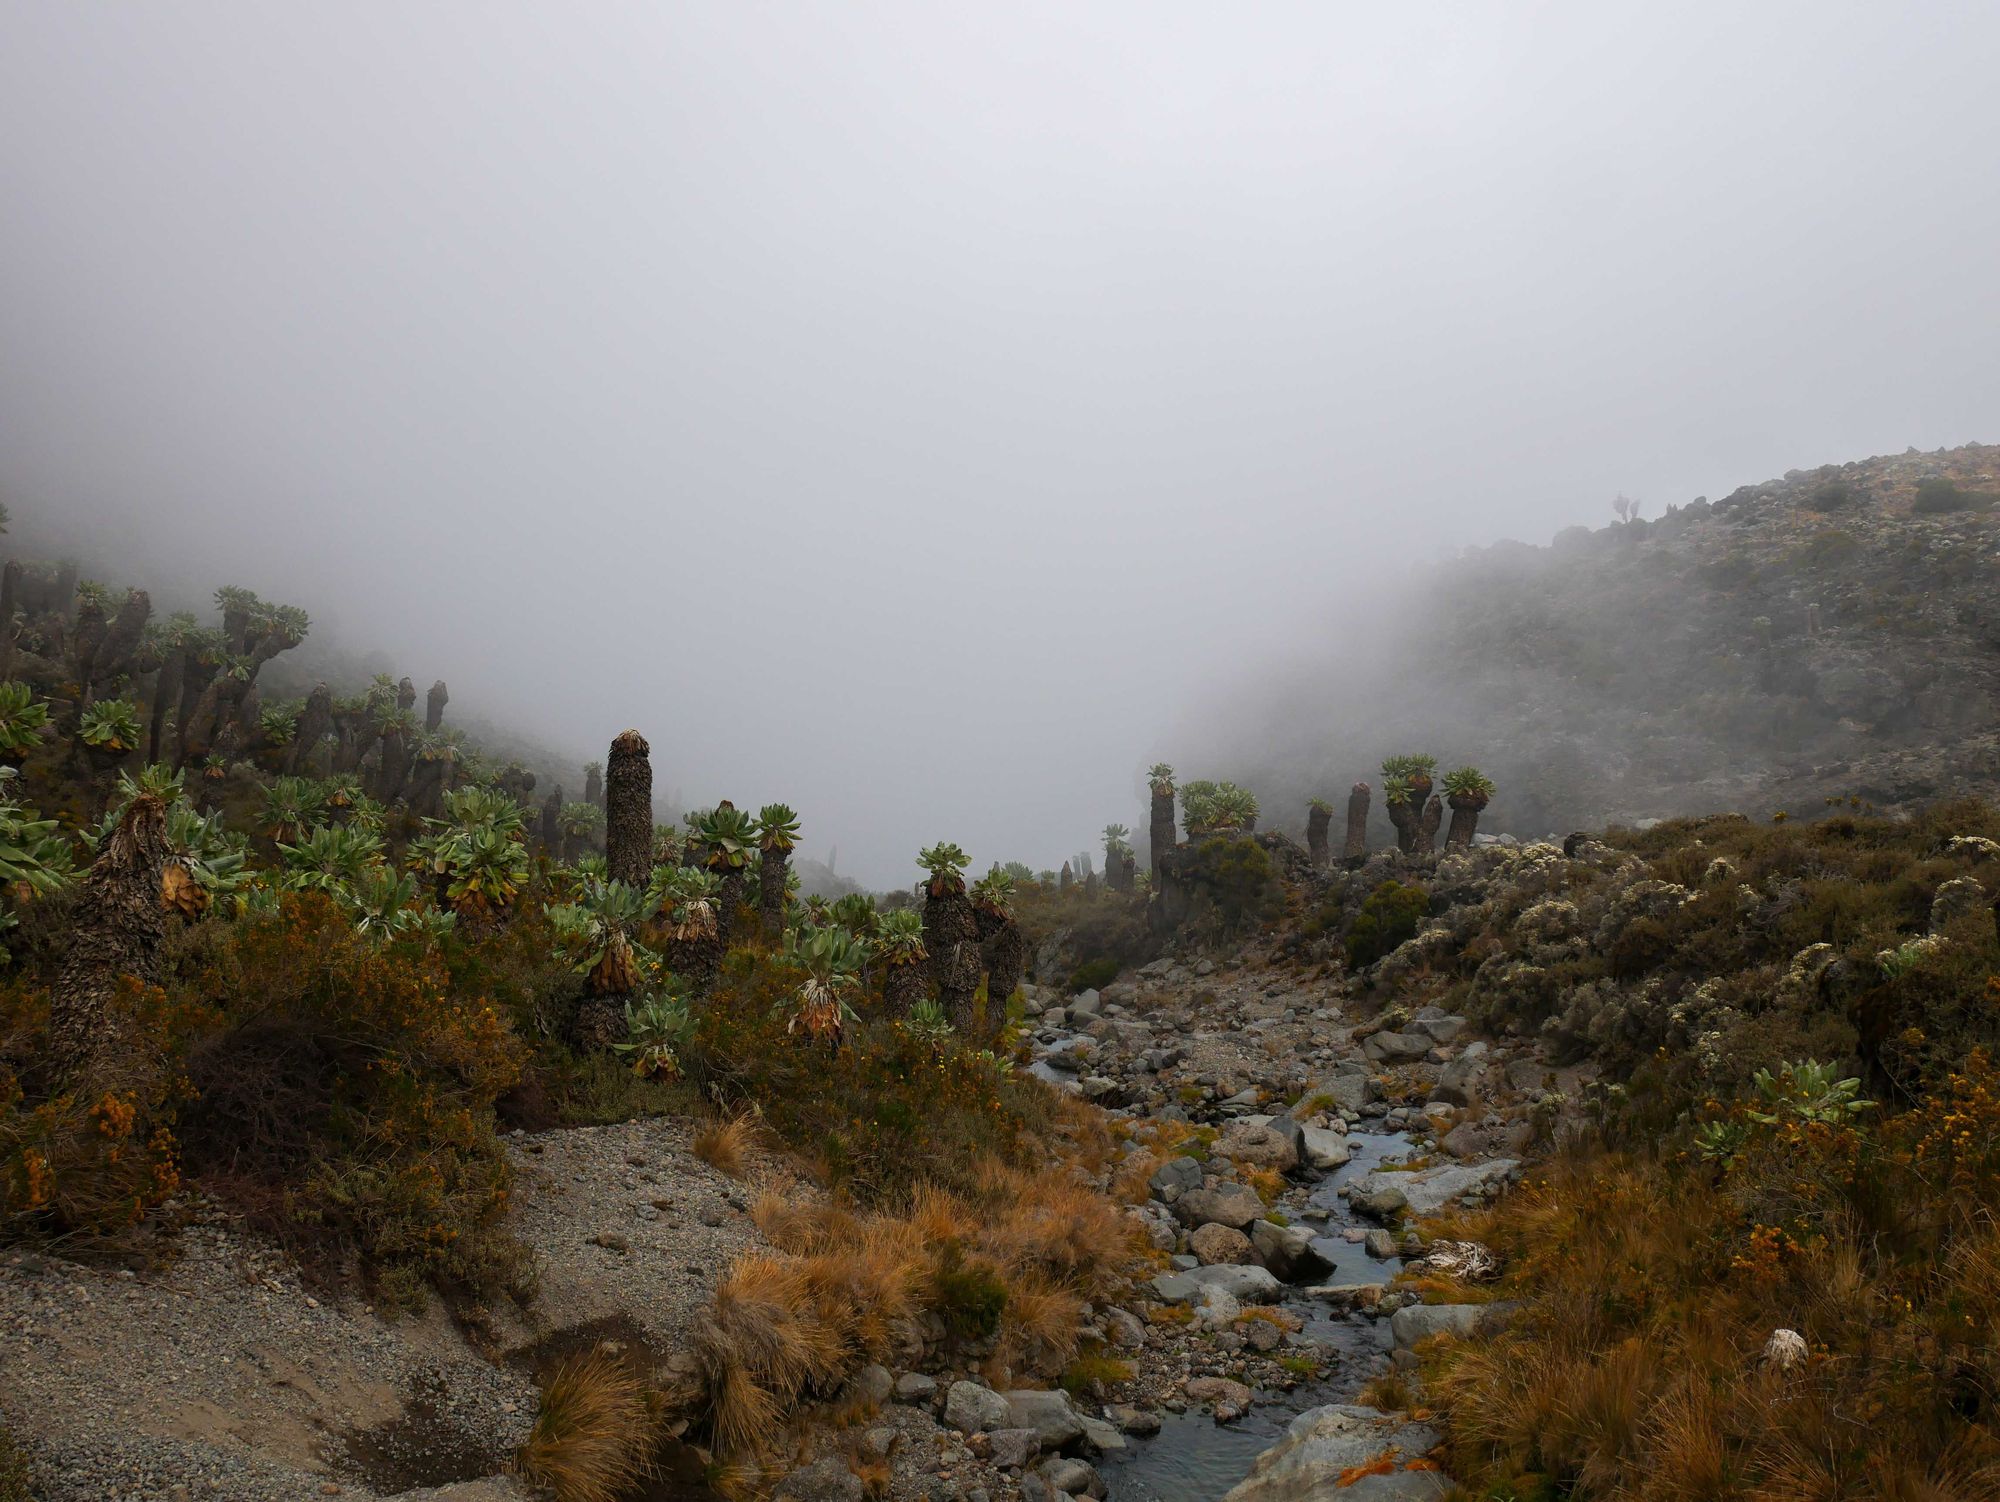 A stream with giant senecio trees growing alongside it, with the background obscured by cloud, on Mount Kilimanjaro.